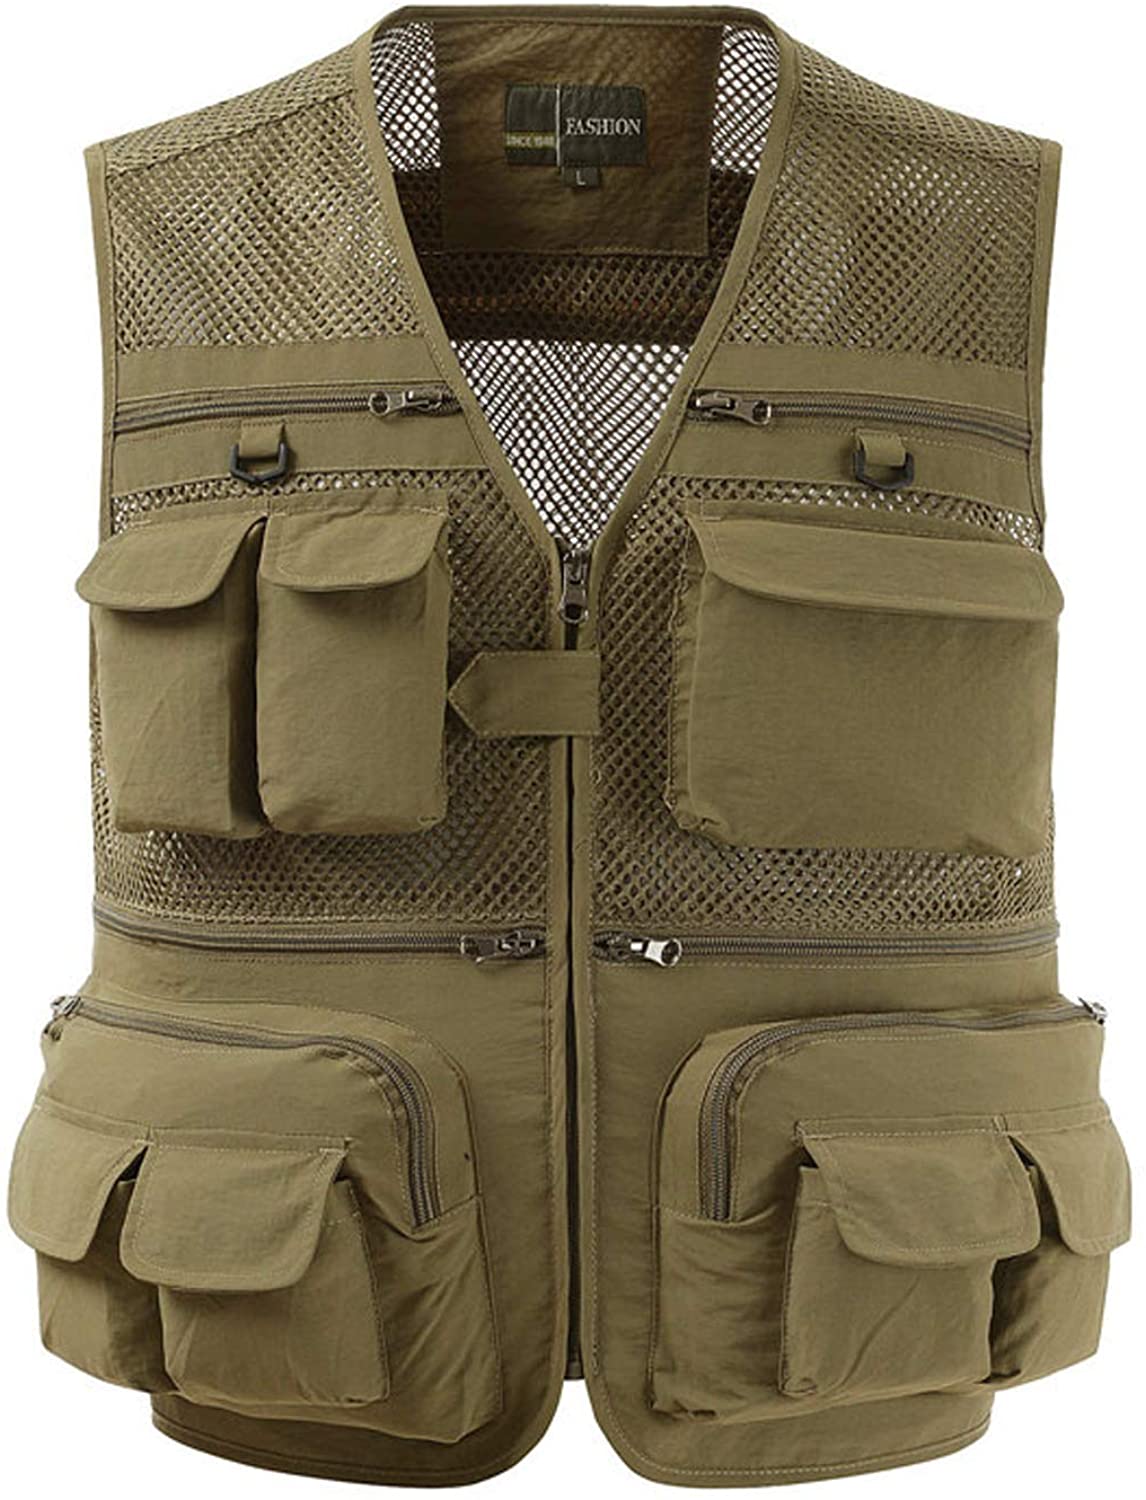 Z&A Mens Summer Casual Outdoor Work Safari Fishing Travel Photo Vest with Pockets